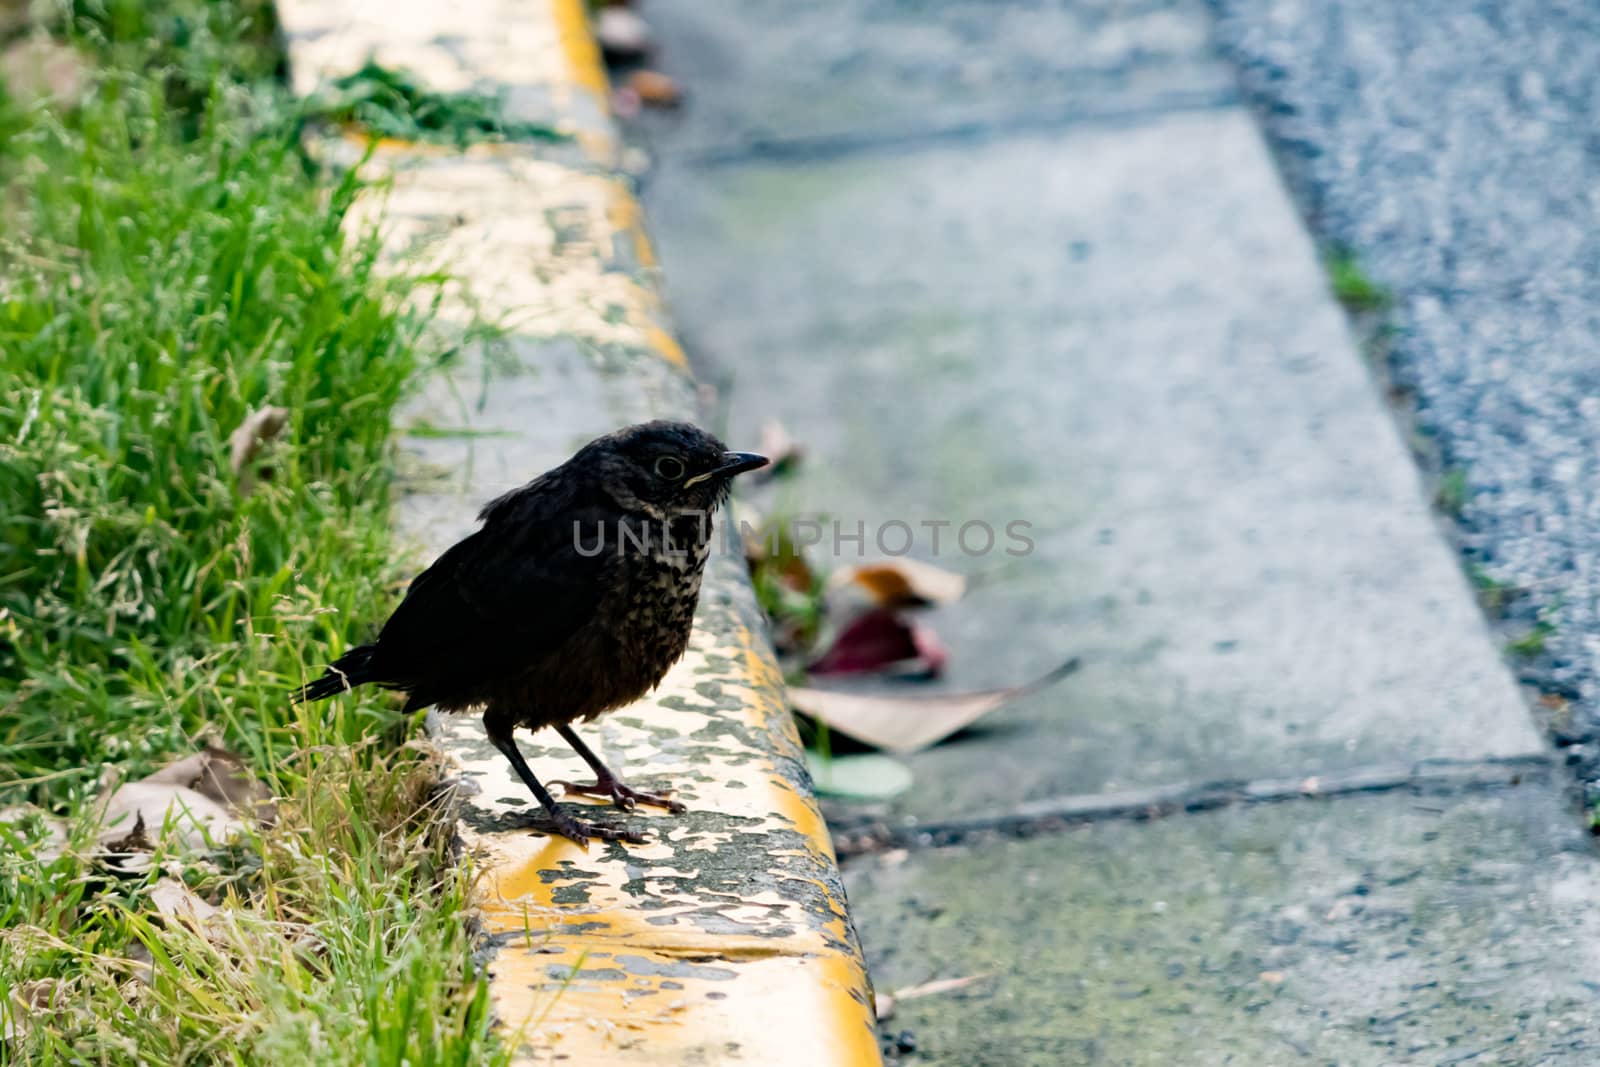 A black bird on the footpath waiting for a friend waiting for a friend